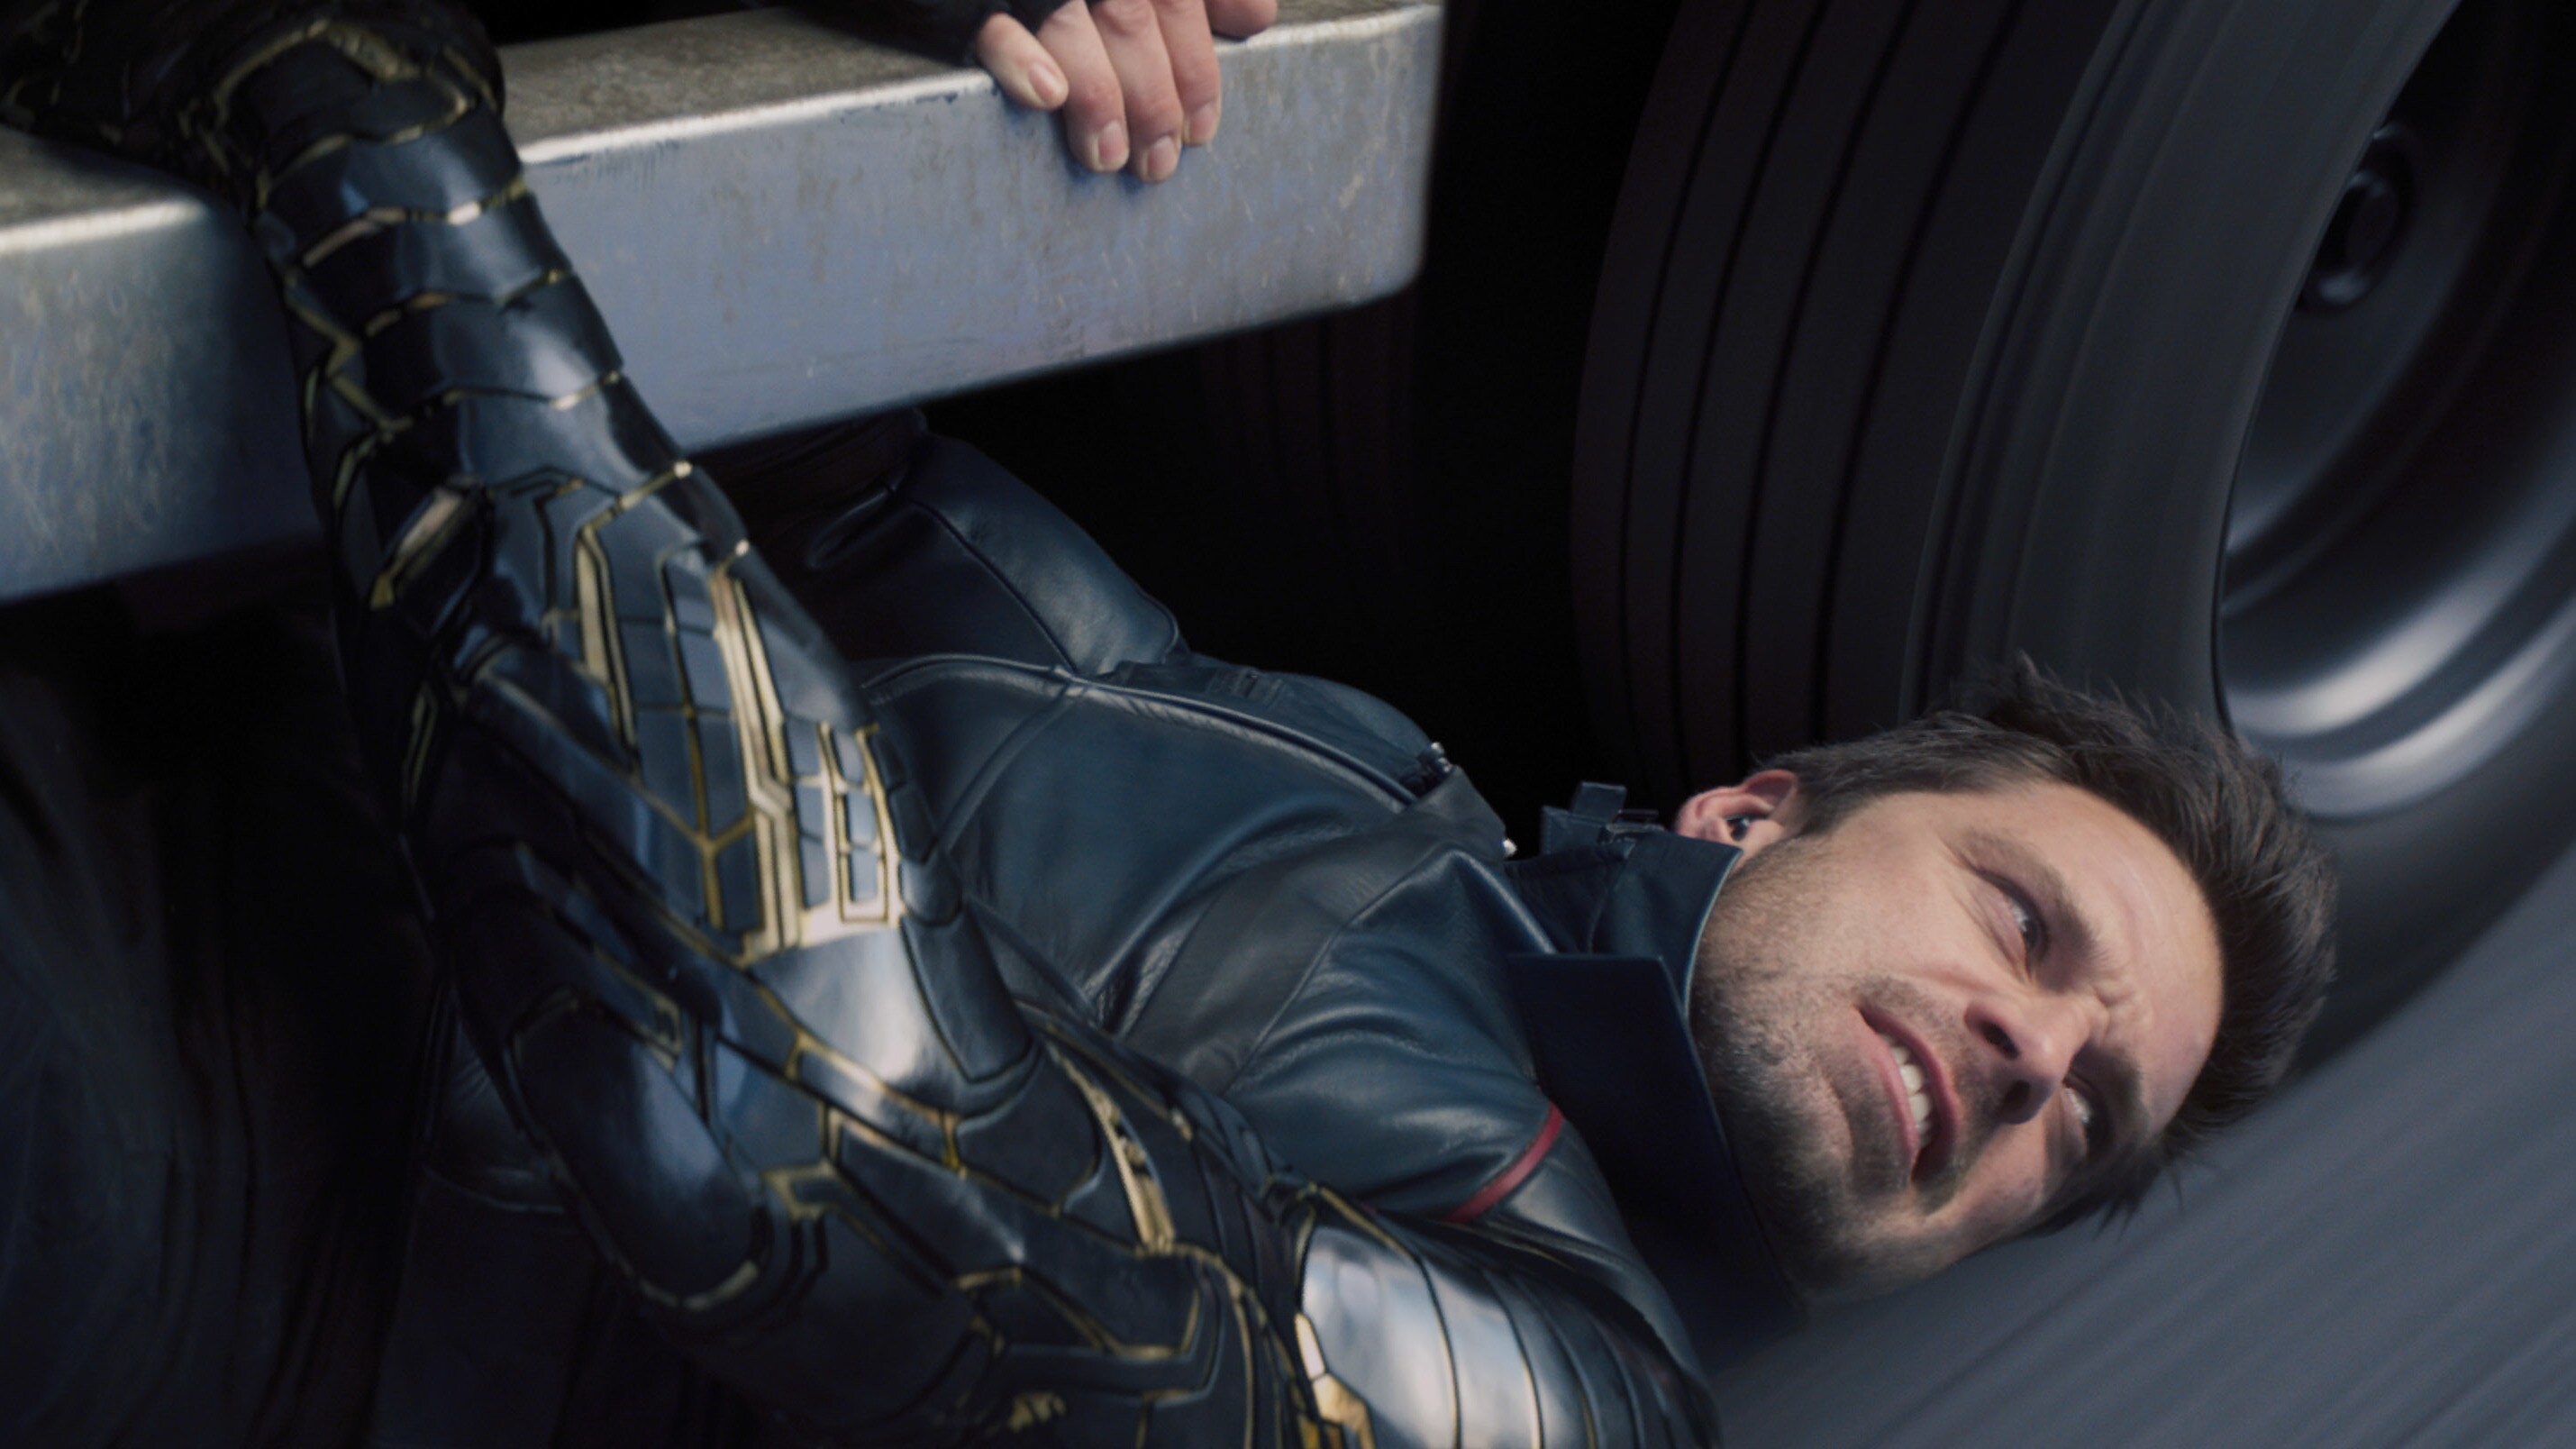 Winter Soldier/Bucky Barnes (Sebastian Stan) in Marvel Studios' THE FALCON AND THE WINTER SOLDIER exclusively on Disney+. Photo courtesy of Marvel Studios. ©Marvel Studios 2021. All Rights Reserved.